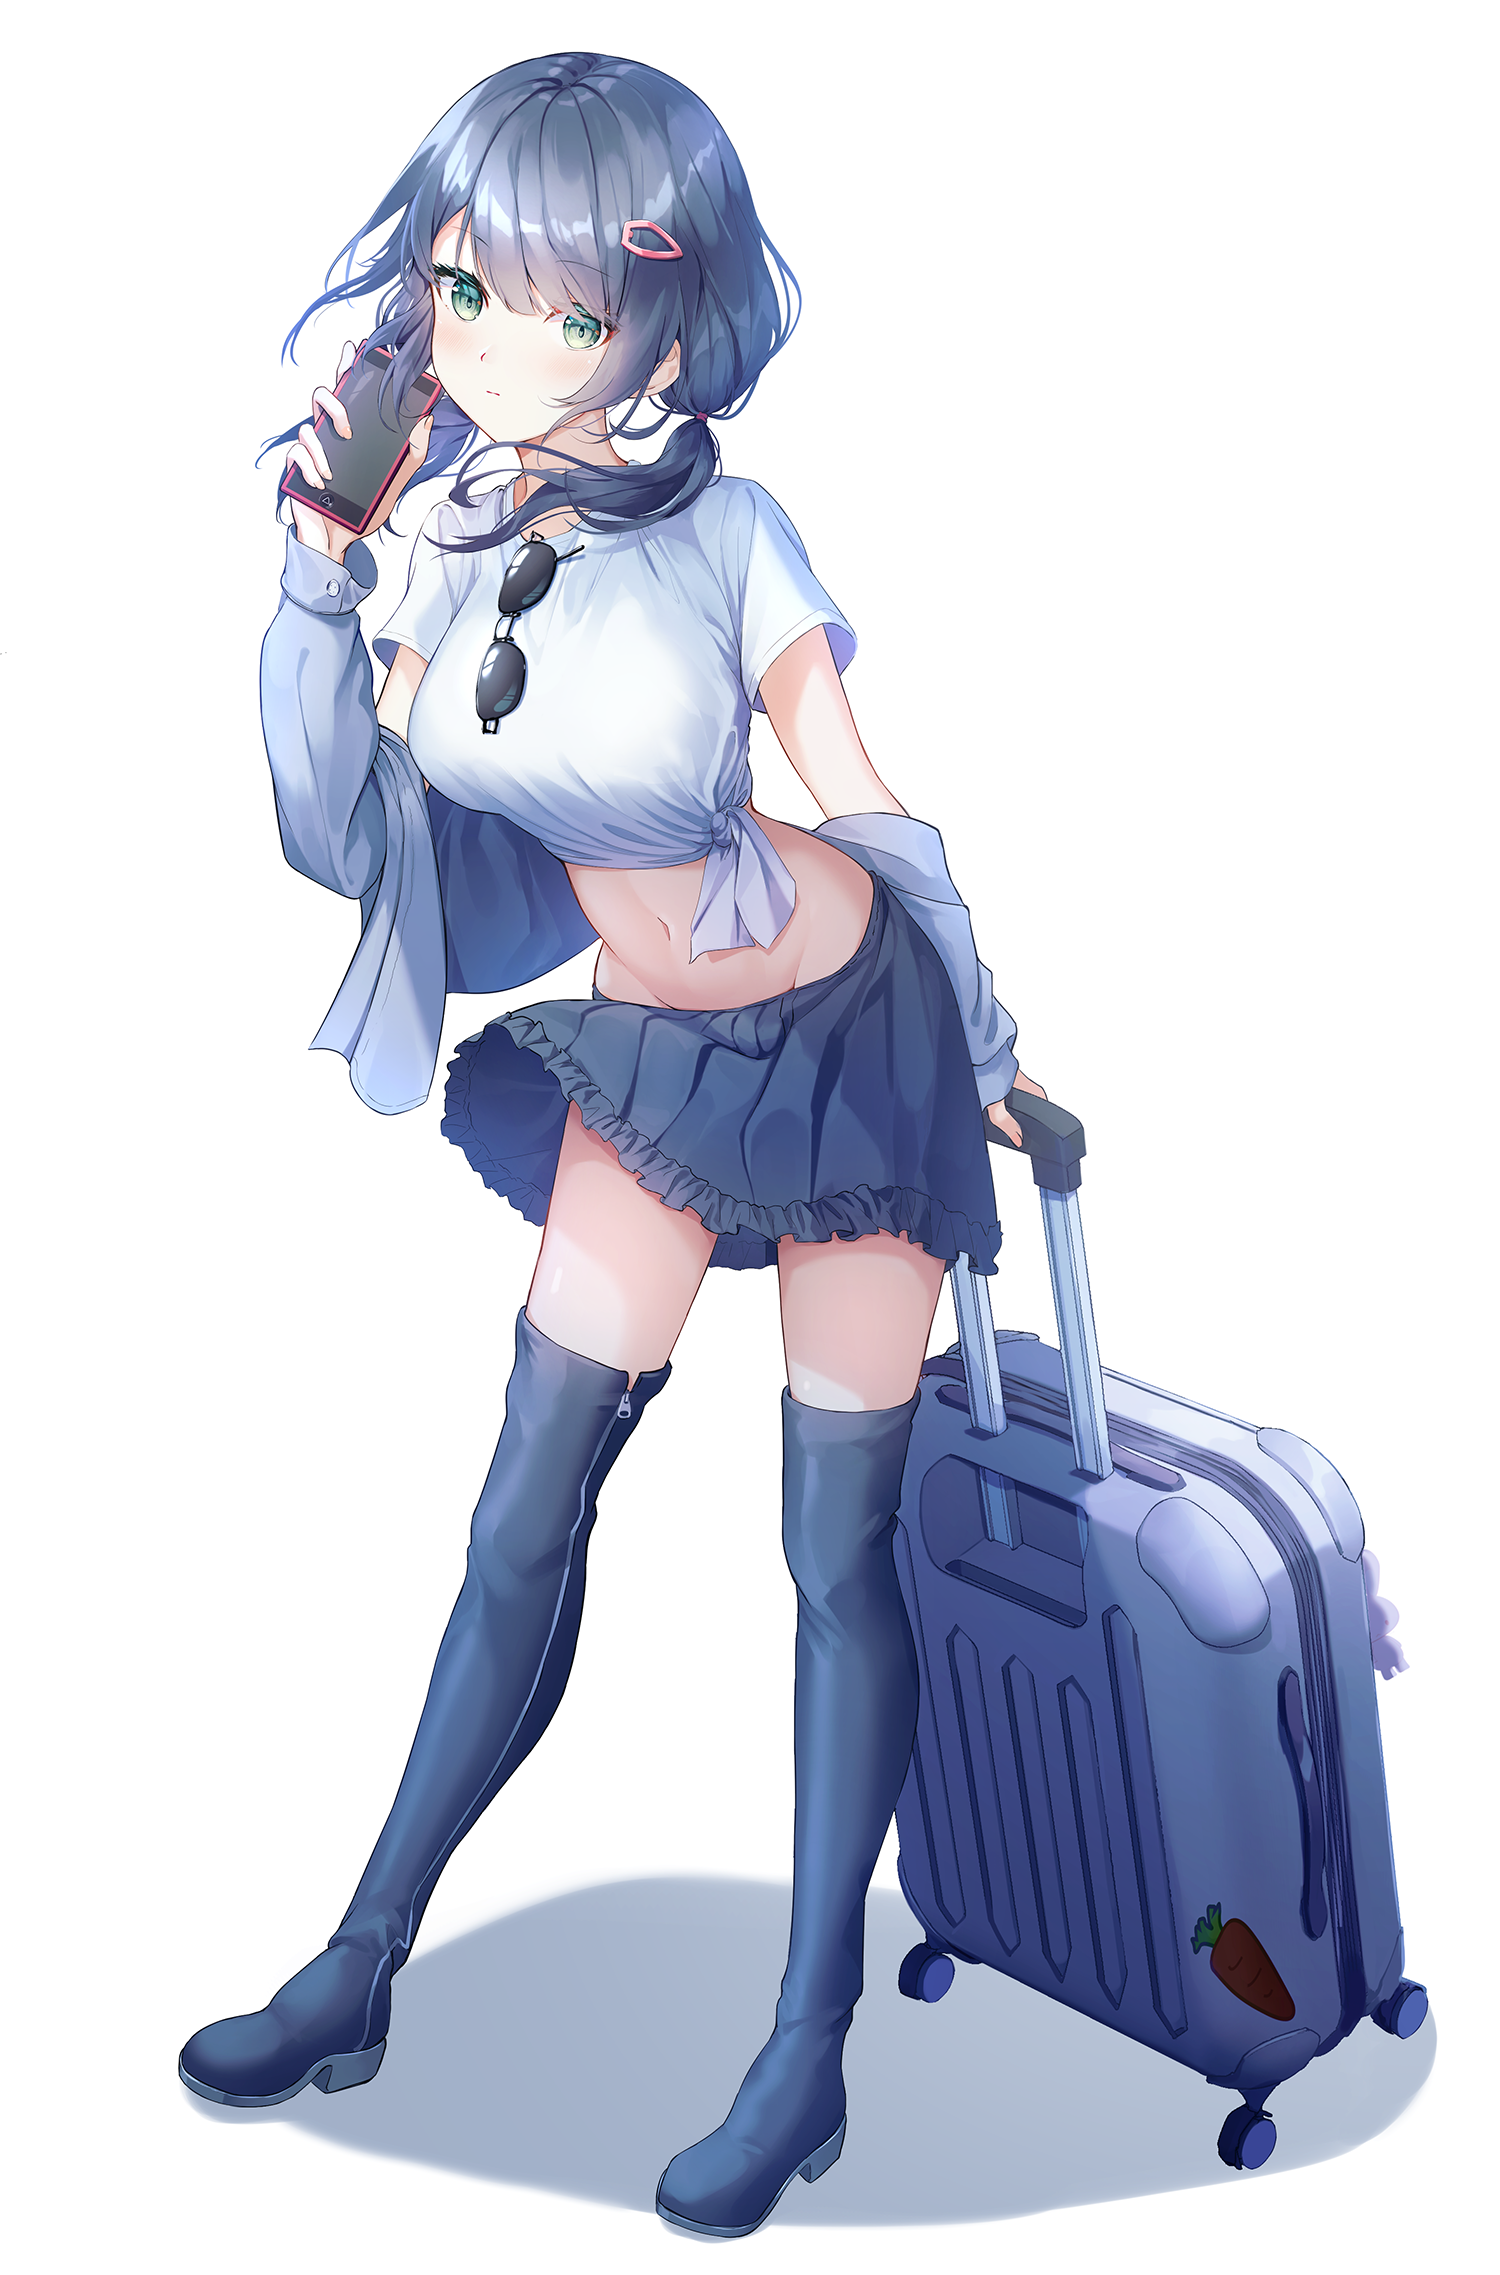 Airport outfits插画图片壁纸